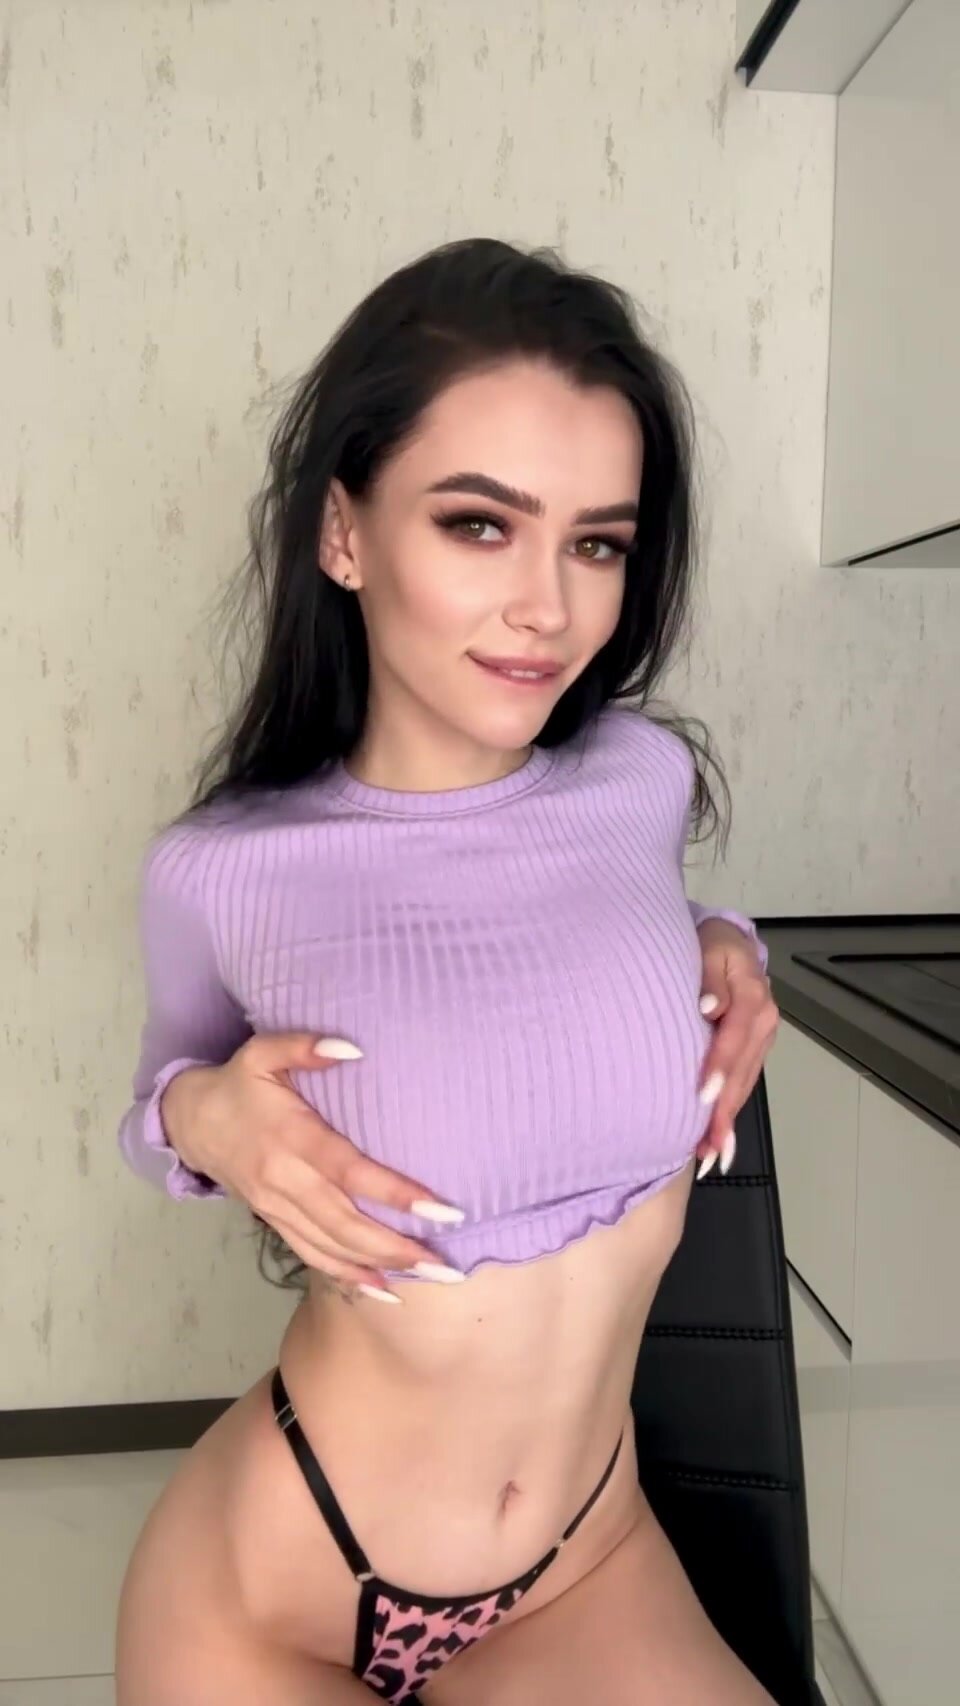 I would be happy to find fans of my pale nipples here